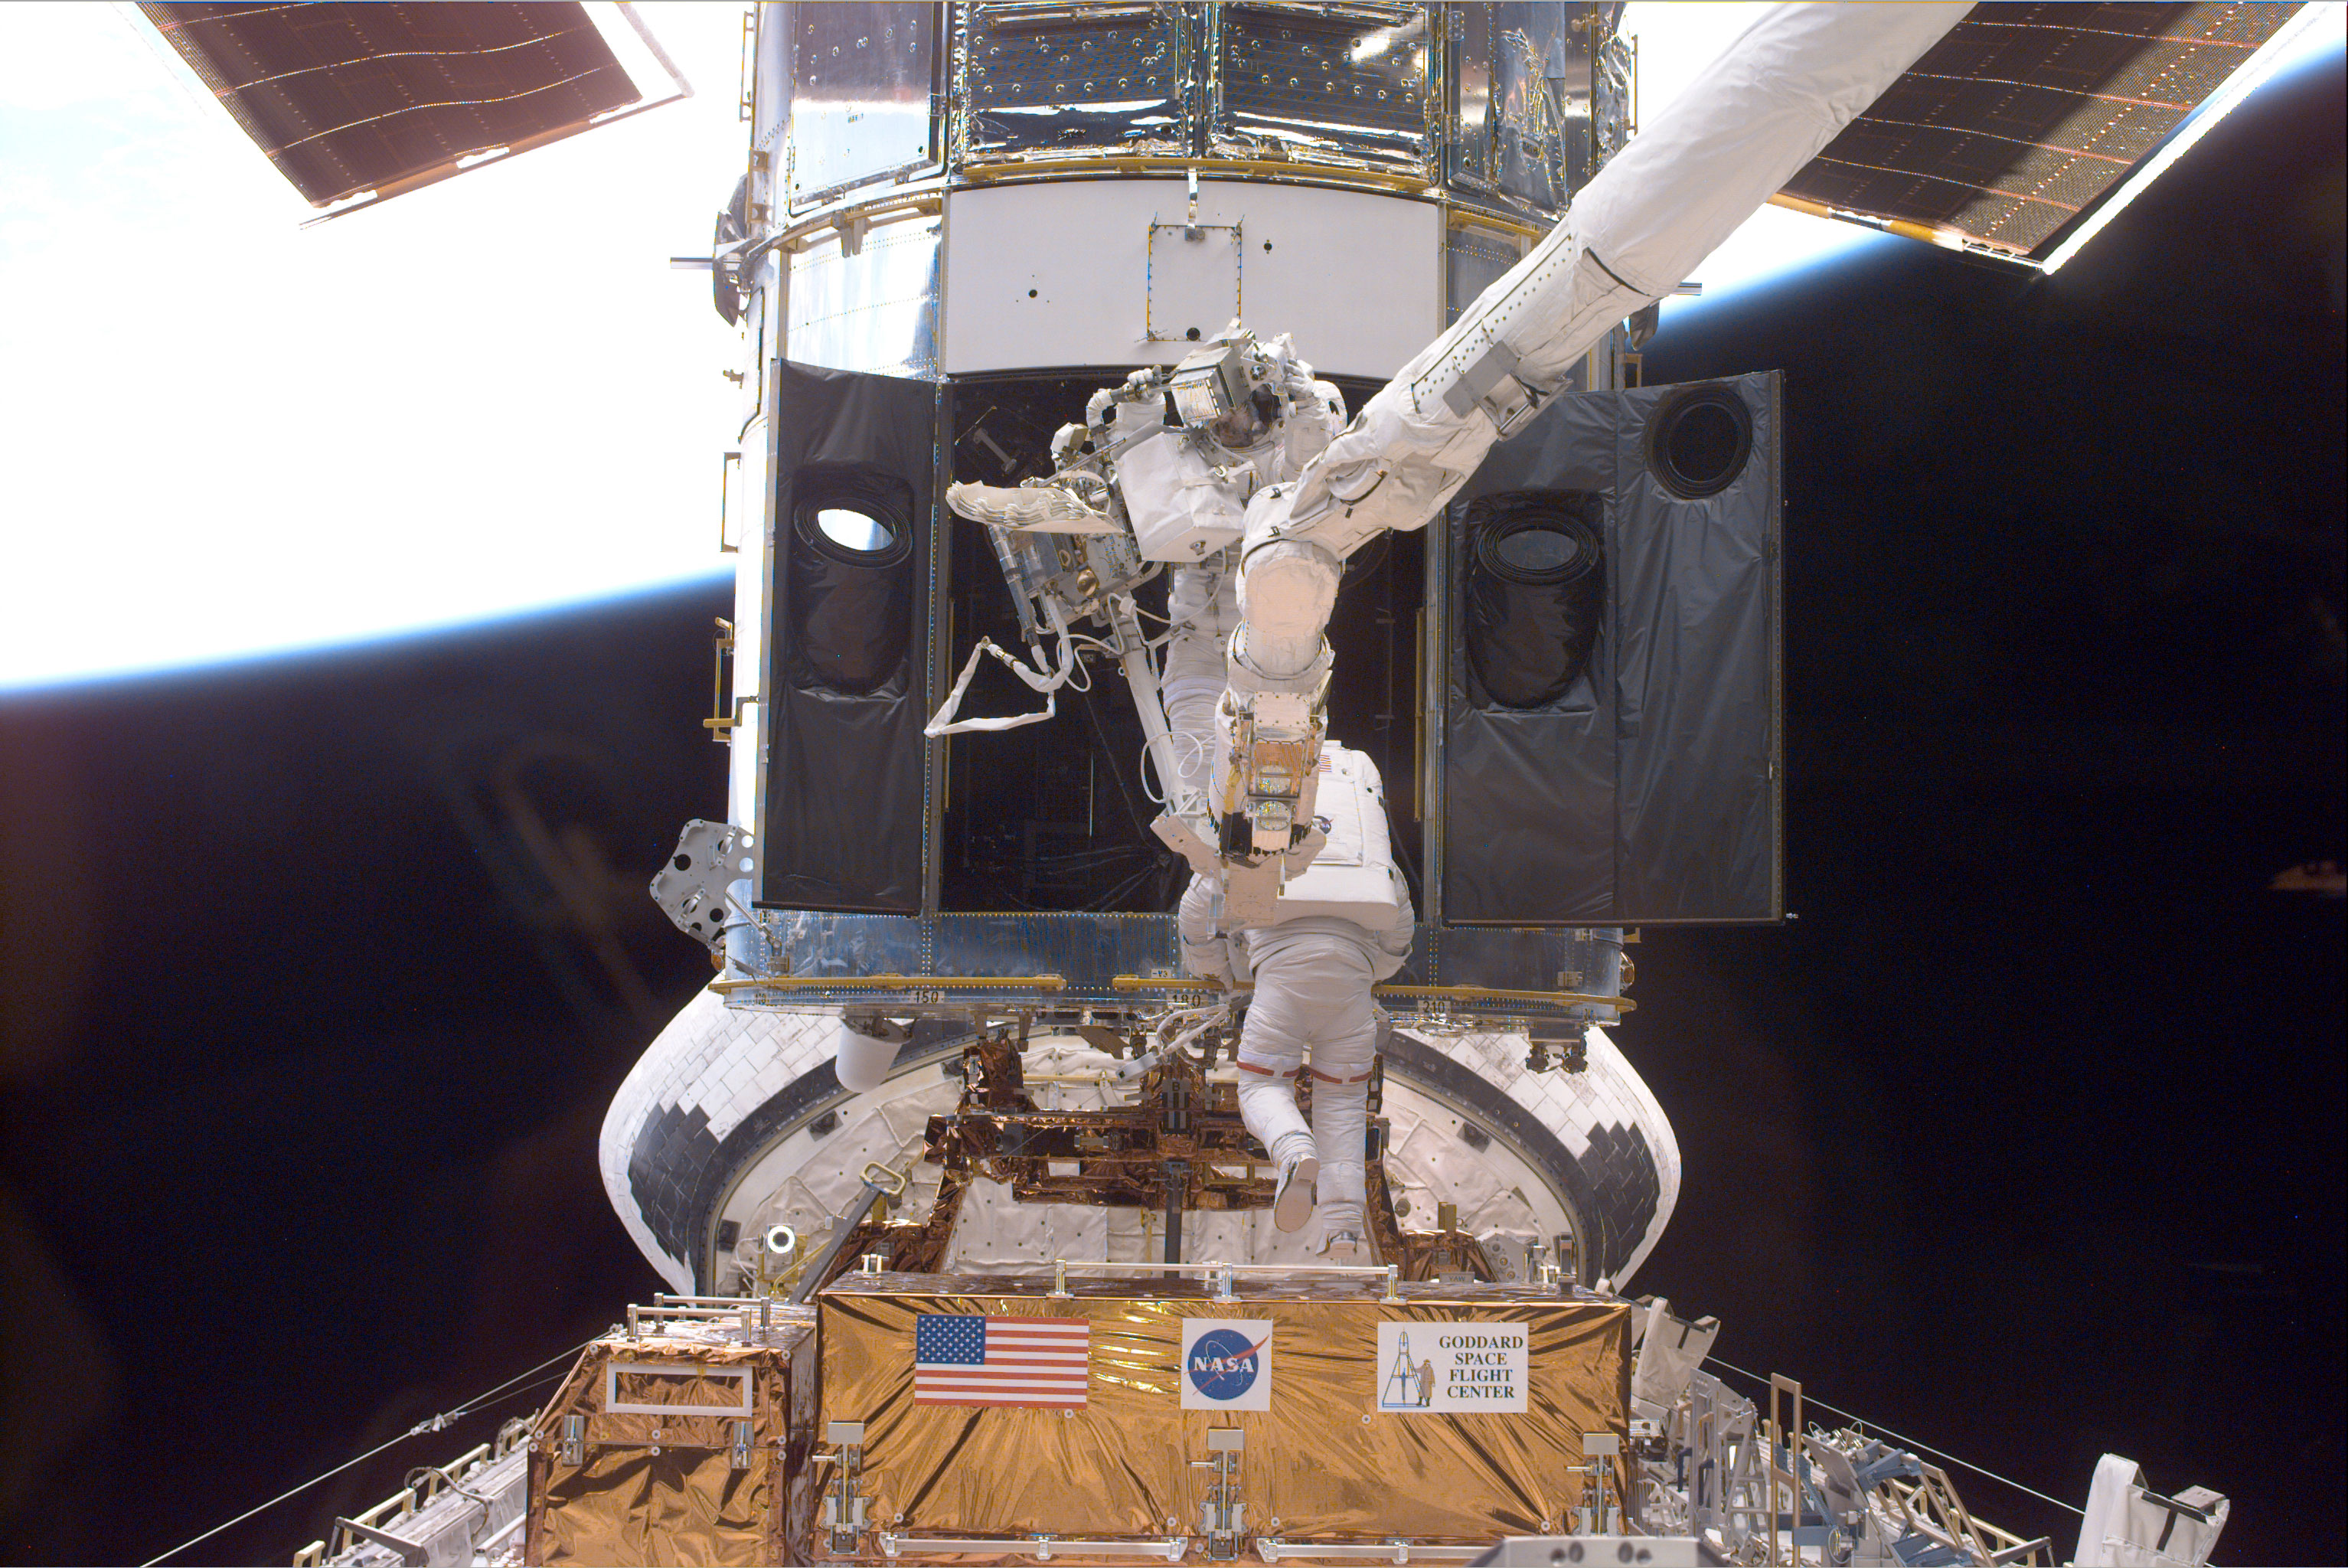 Payload Commander Steven L. Smith (bottom), and Mission Specialist John M. Grunsfeld, perform servicing tasks on the temporarily-captured Hubble Space Telescope. Grunsfeld is on a foot restraint connected to Discovery’s RMS robot arm. Smith, making his second servicing visit to HST, is using handrails on the telescope. Credit: NASA